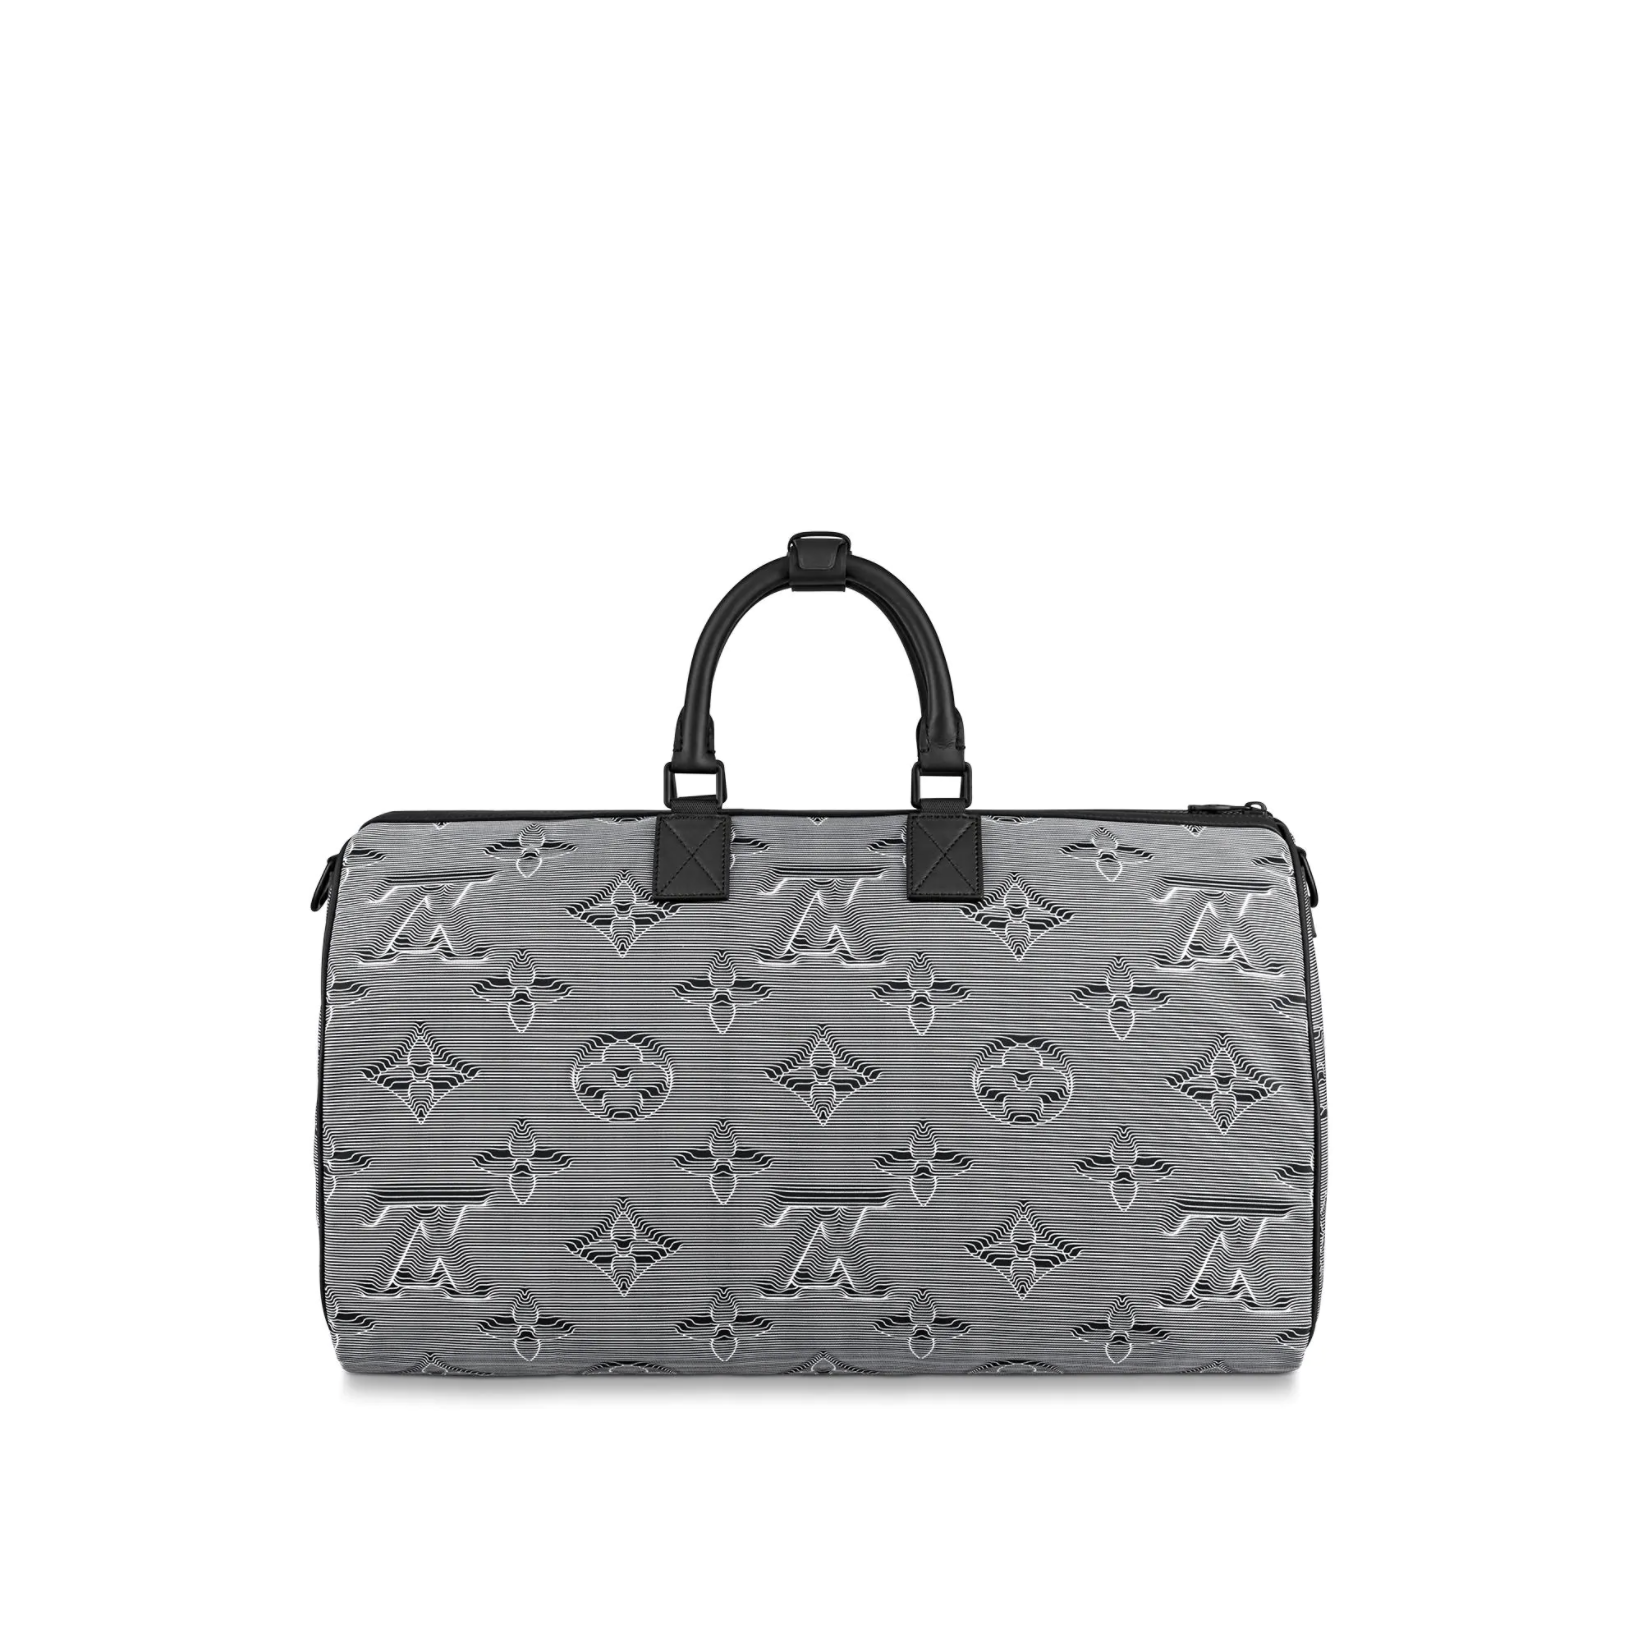 Louis Vuitton Bandouliere 50 Distorted Damier N50028 by The-Collectory